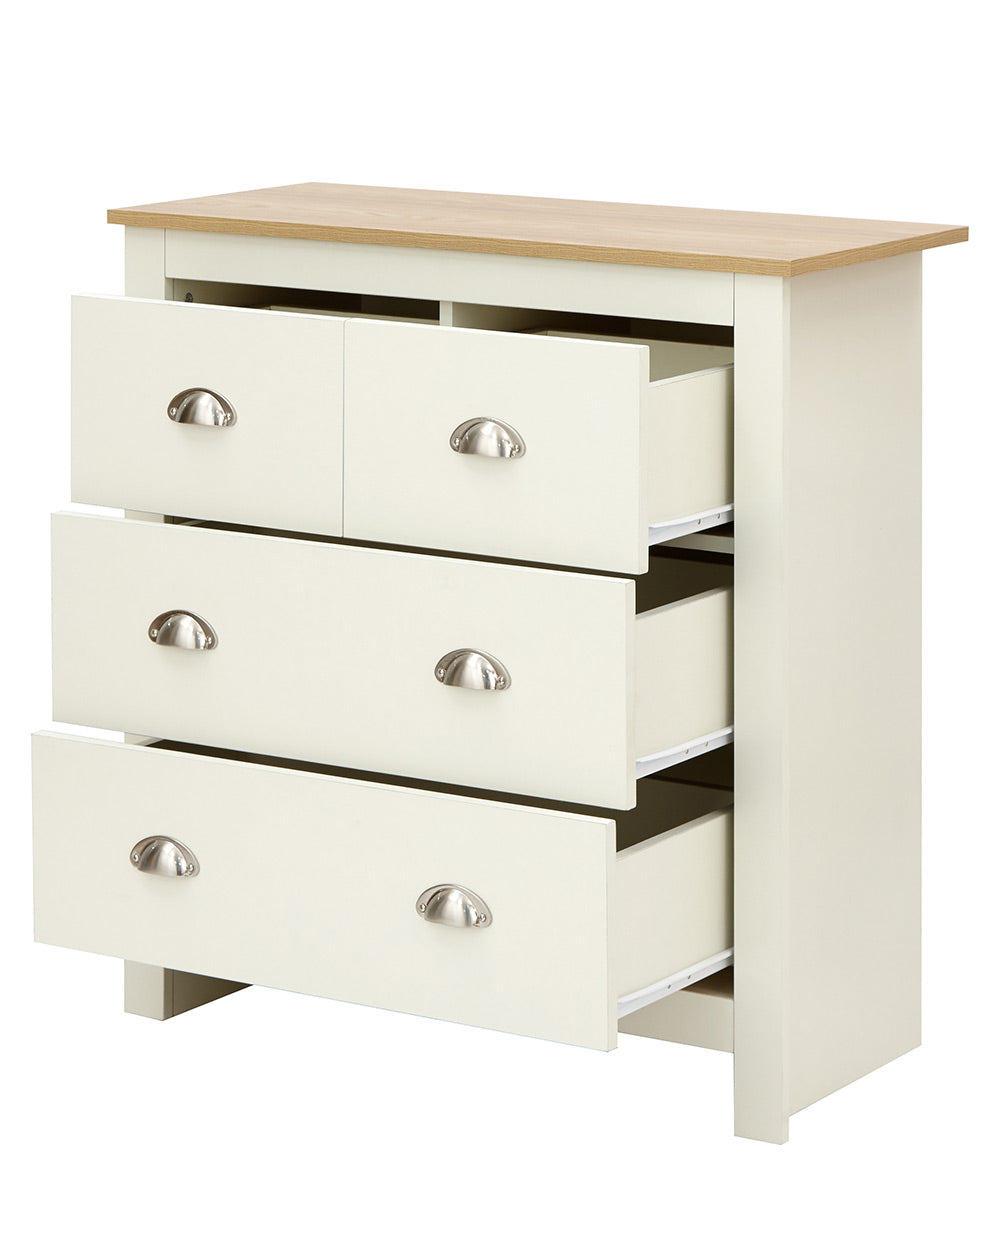 Lancaster 2 + 2 chest of drawers in cream with an oak effect top with all drawers open on a white cut out bacgkround